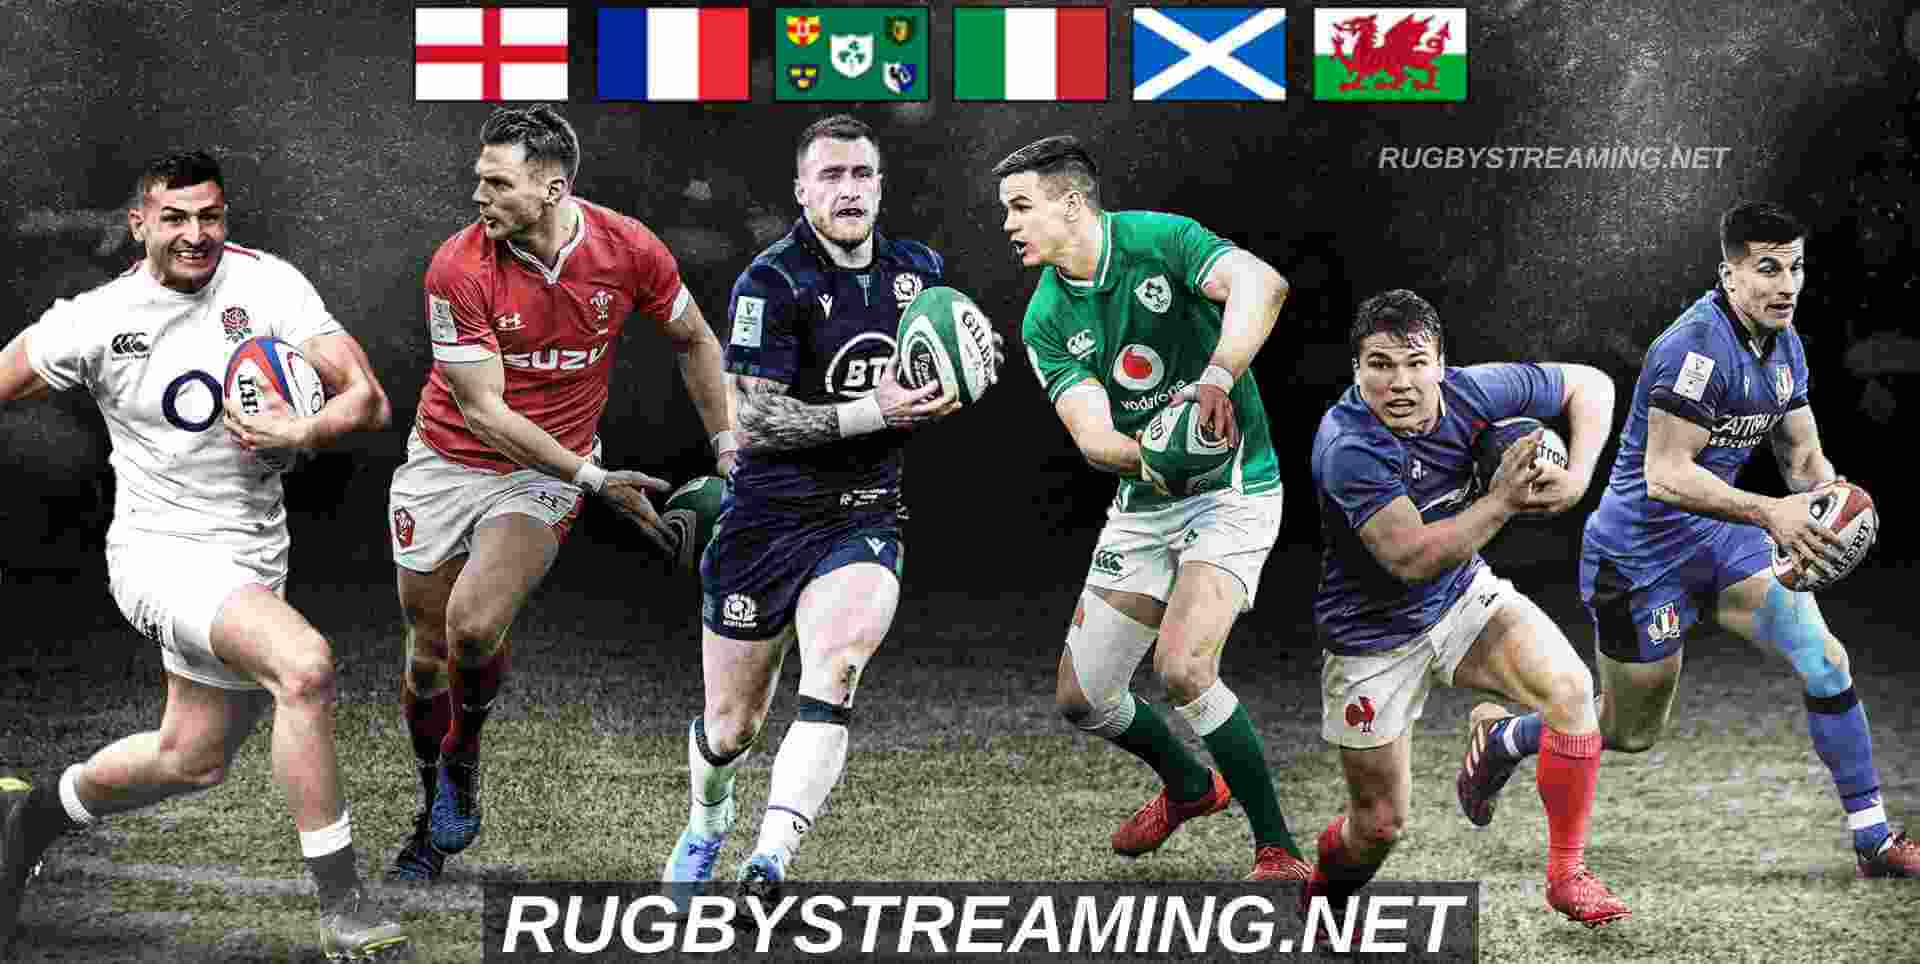 six-nations-rugby-schedule-and-live-streaming